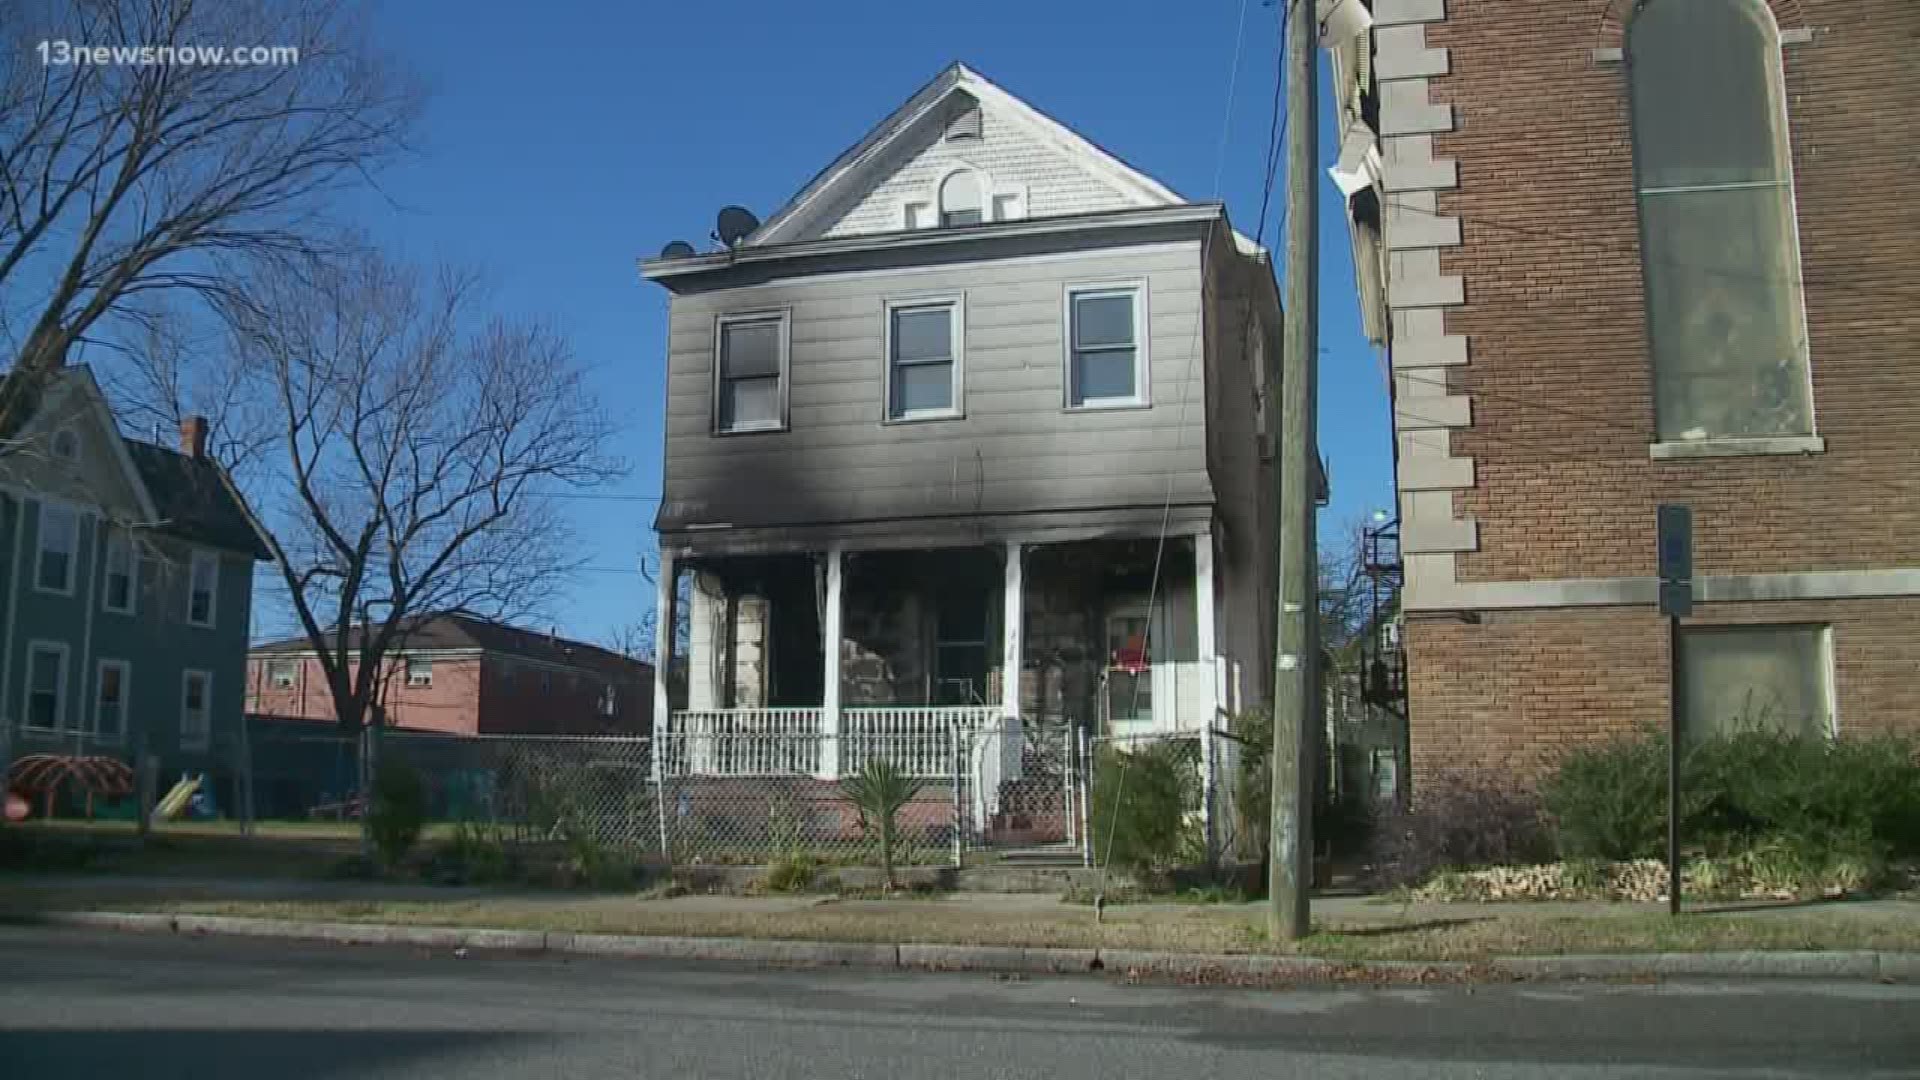 The Red Cross is helping three people who were displaced by a fire on Webster Avenue in Portsmouth on Christmas Day.